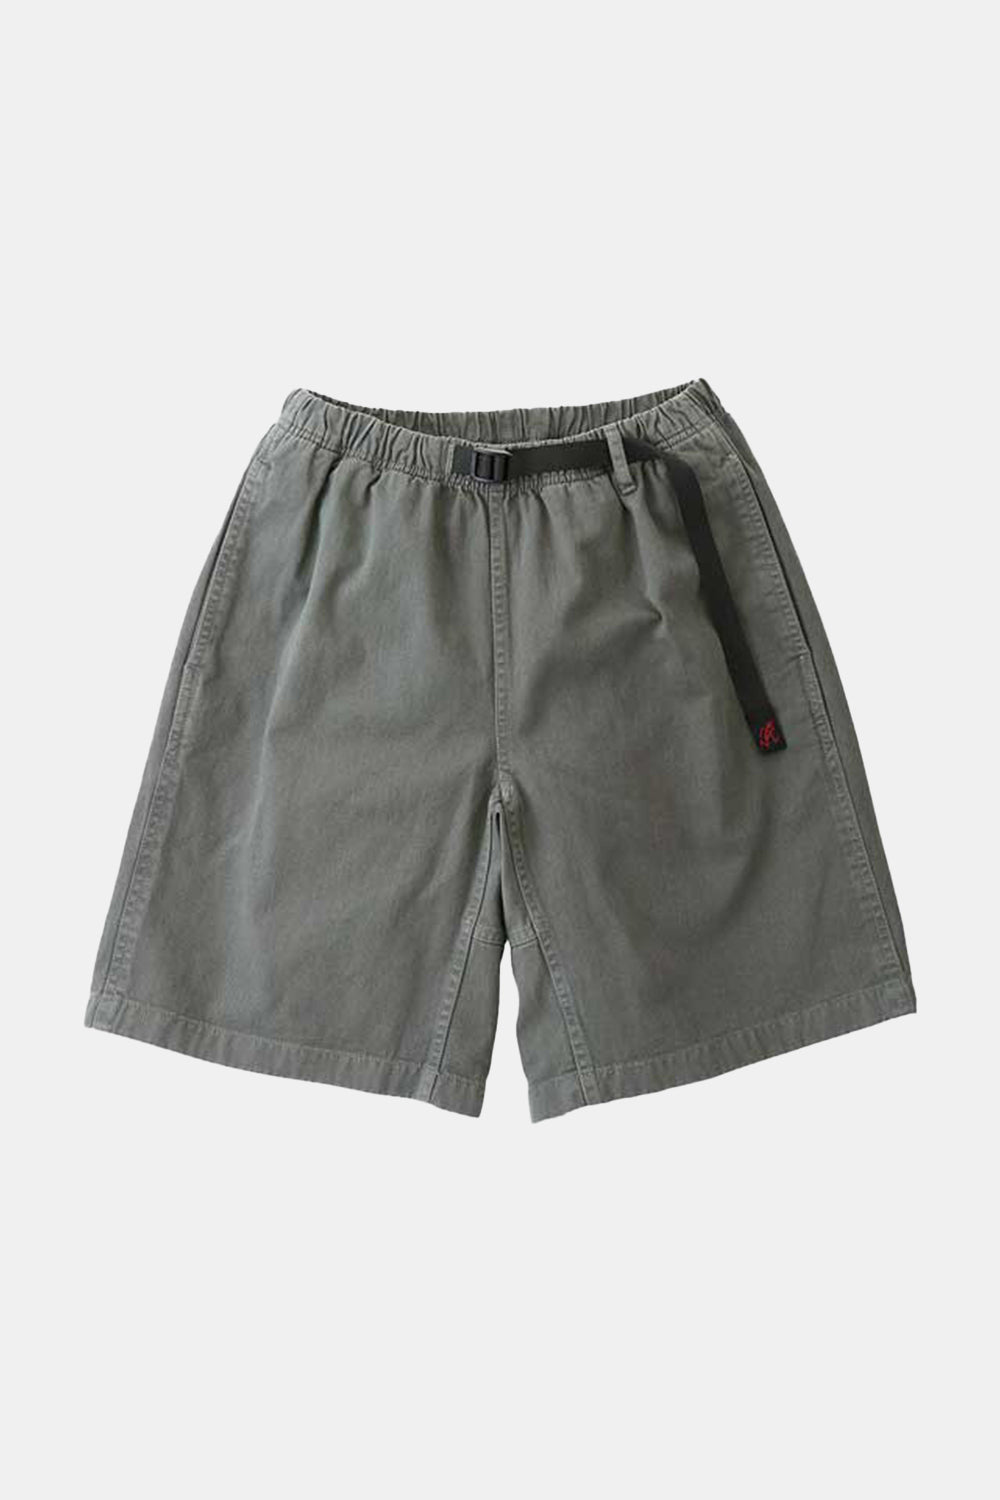 Gramicci G-Shorts Double-ringspun Organic Cotton Twill (Charcoal) | Number Six